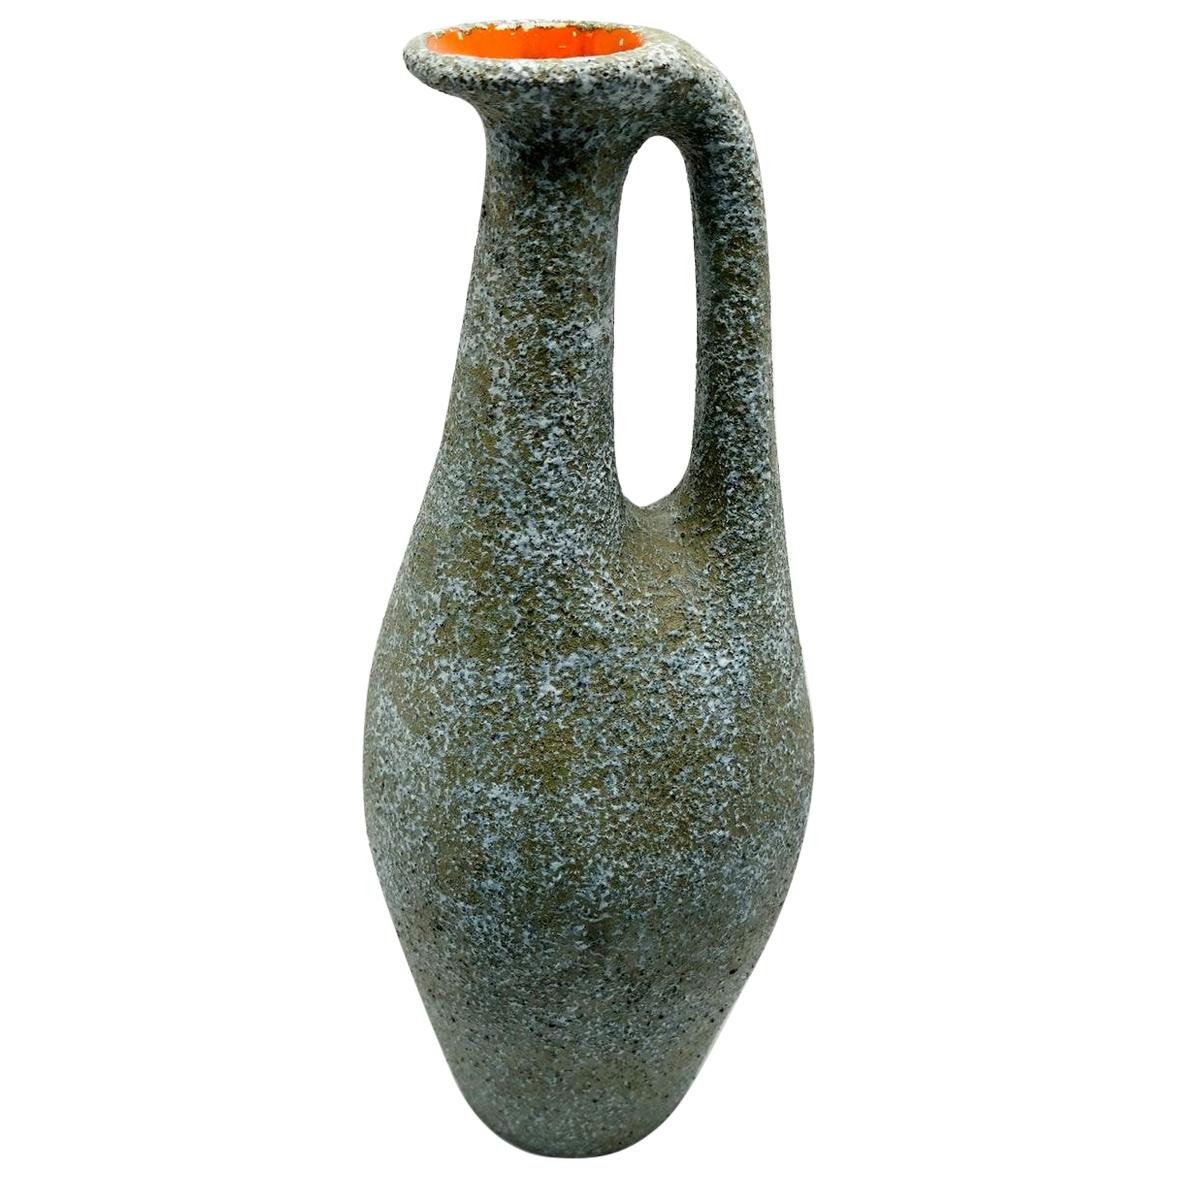 Ceramic Details about   New Cracked Dipped Vase Crackle Two Toned Green 12" 